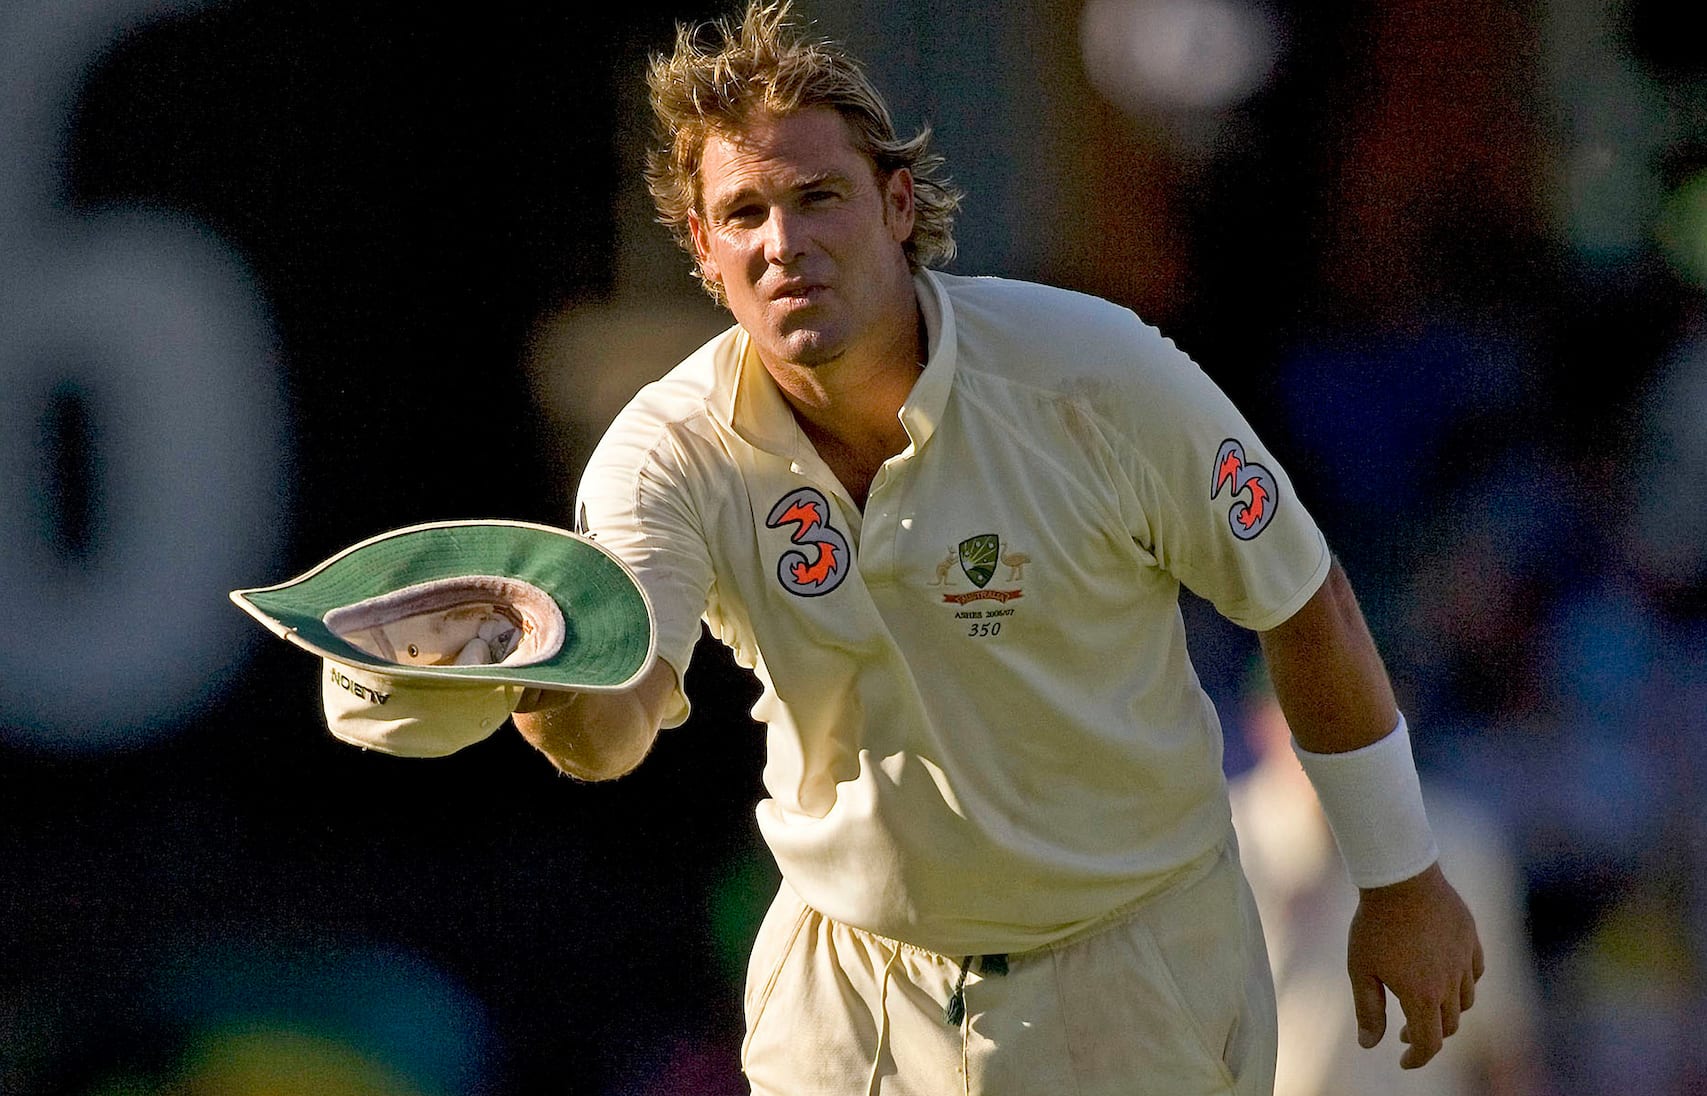 Australian leg-spinner Shane Warne takes his hat off and bows to the crowd after dismissing Flintoff on day three of the 5th Ashes test match between Australia and England at the Sydney Cricket Ground, Sydney, Australia on 4 January, 2007.